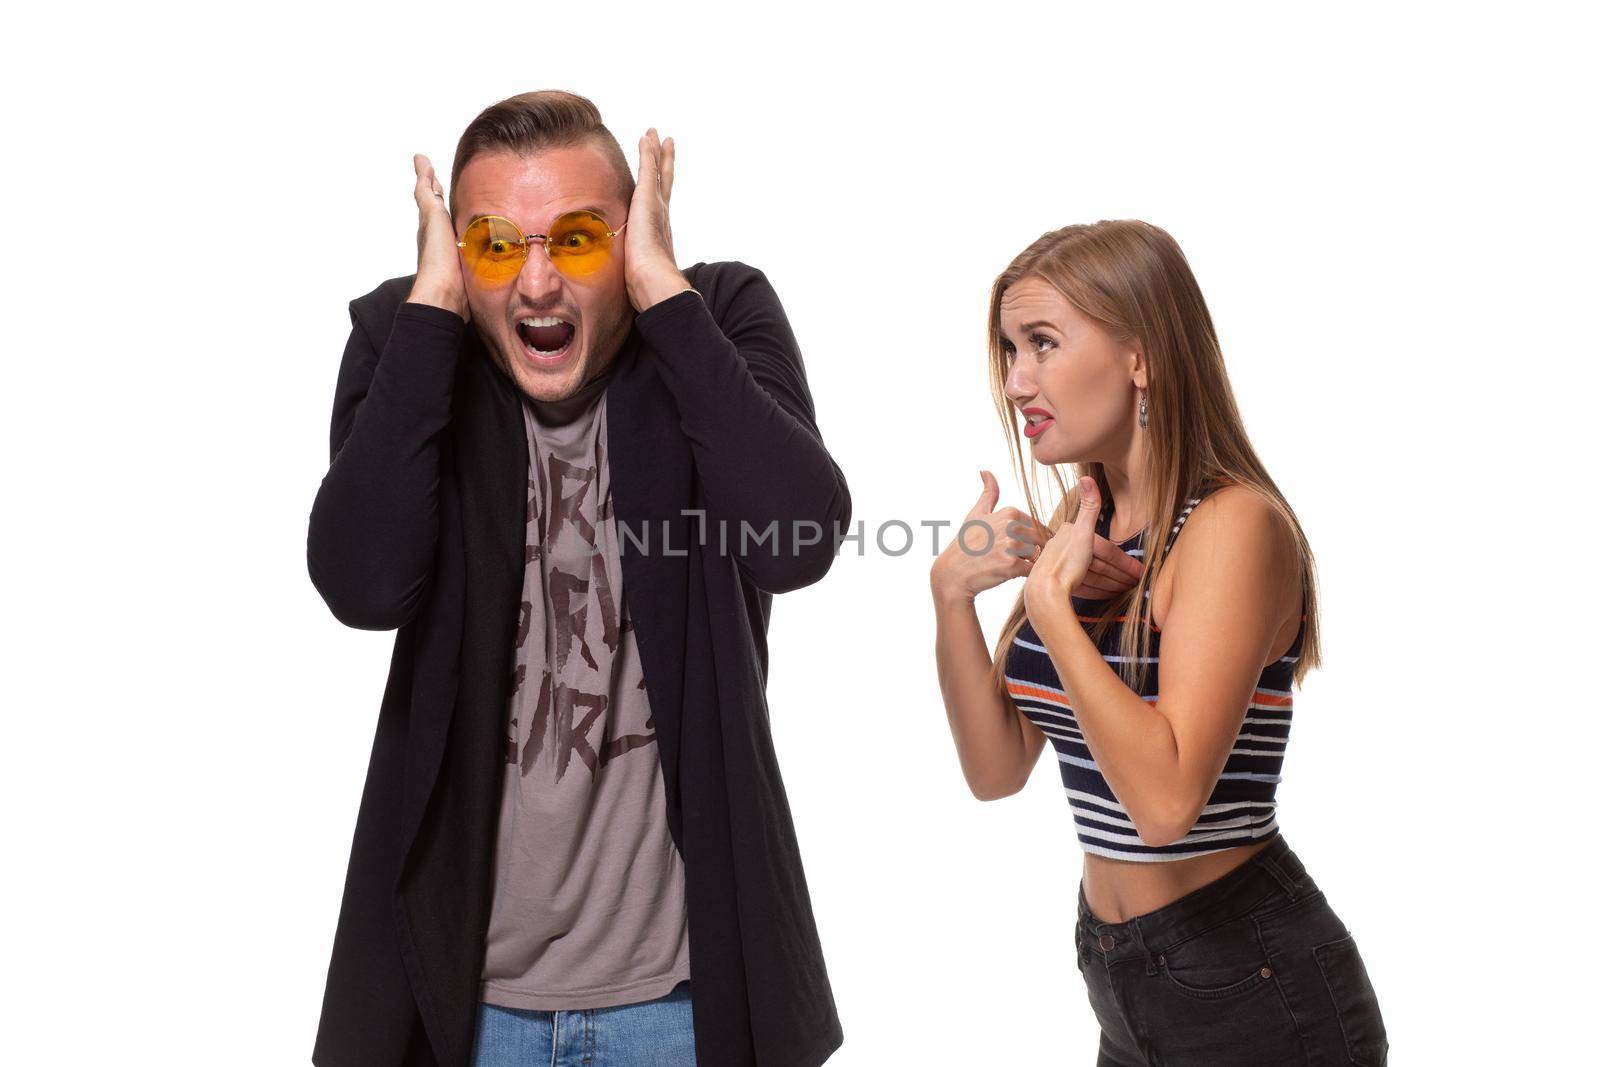 Young family couple have conflict. Angry blonde young European woman gestures with hands, shouts at husband who is guilty, stands together against white background, have dispute and quarrel